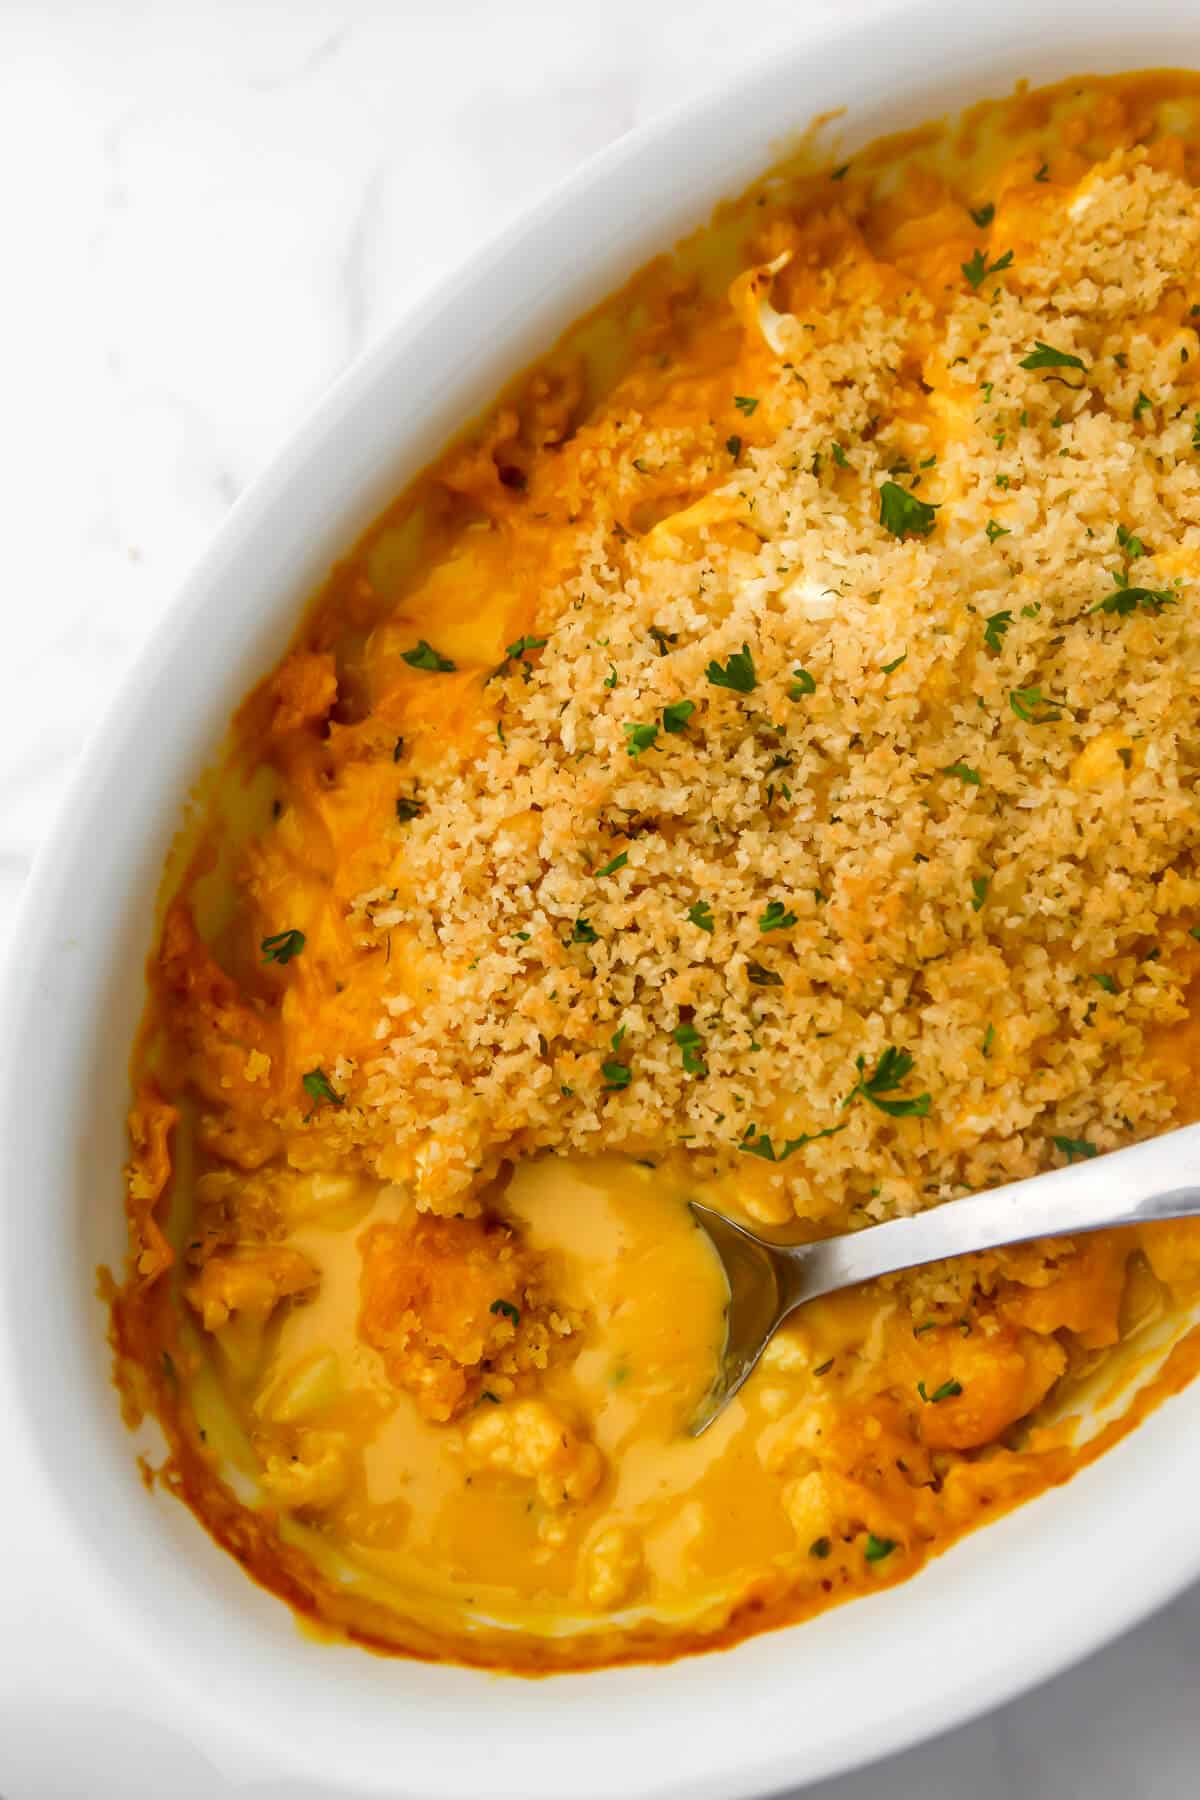 A top view of a baked dairy-free cauliflower bake with breadcrumbs on top.